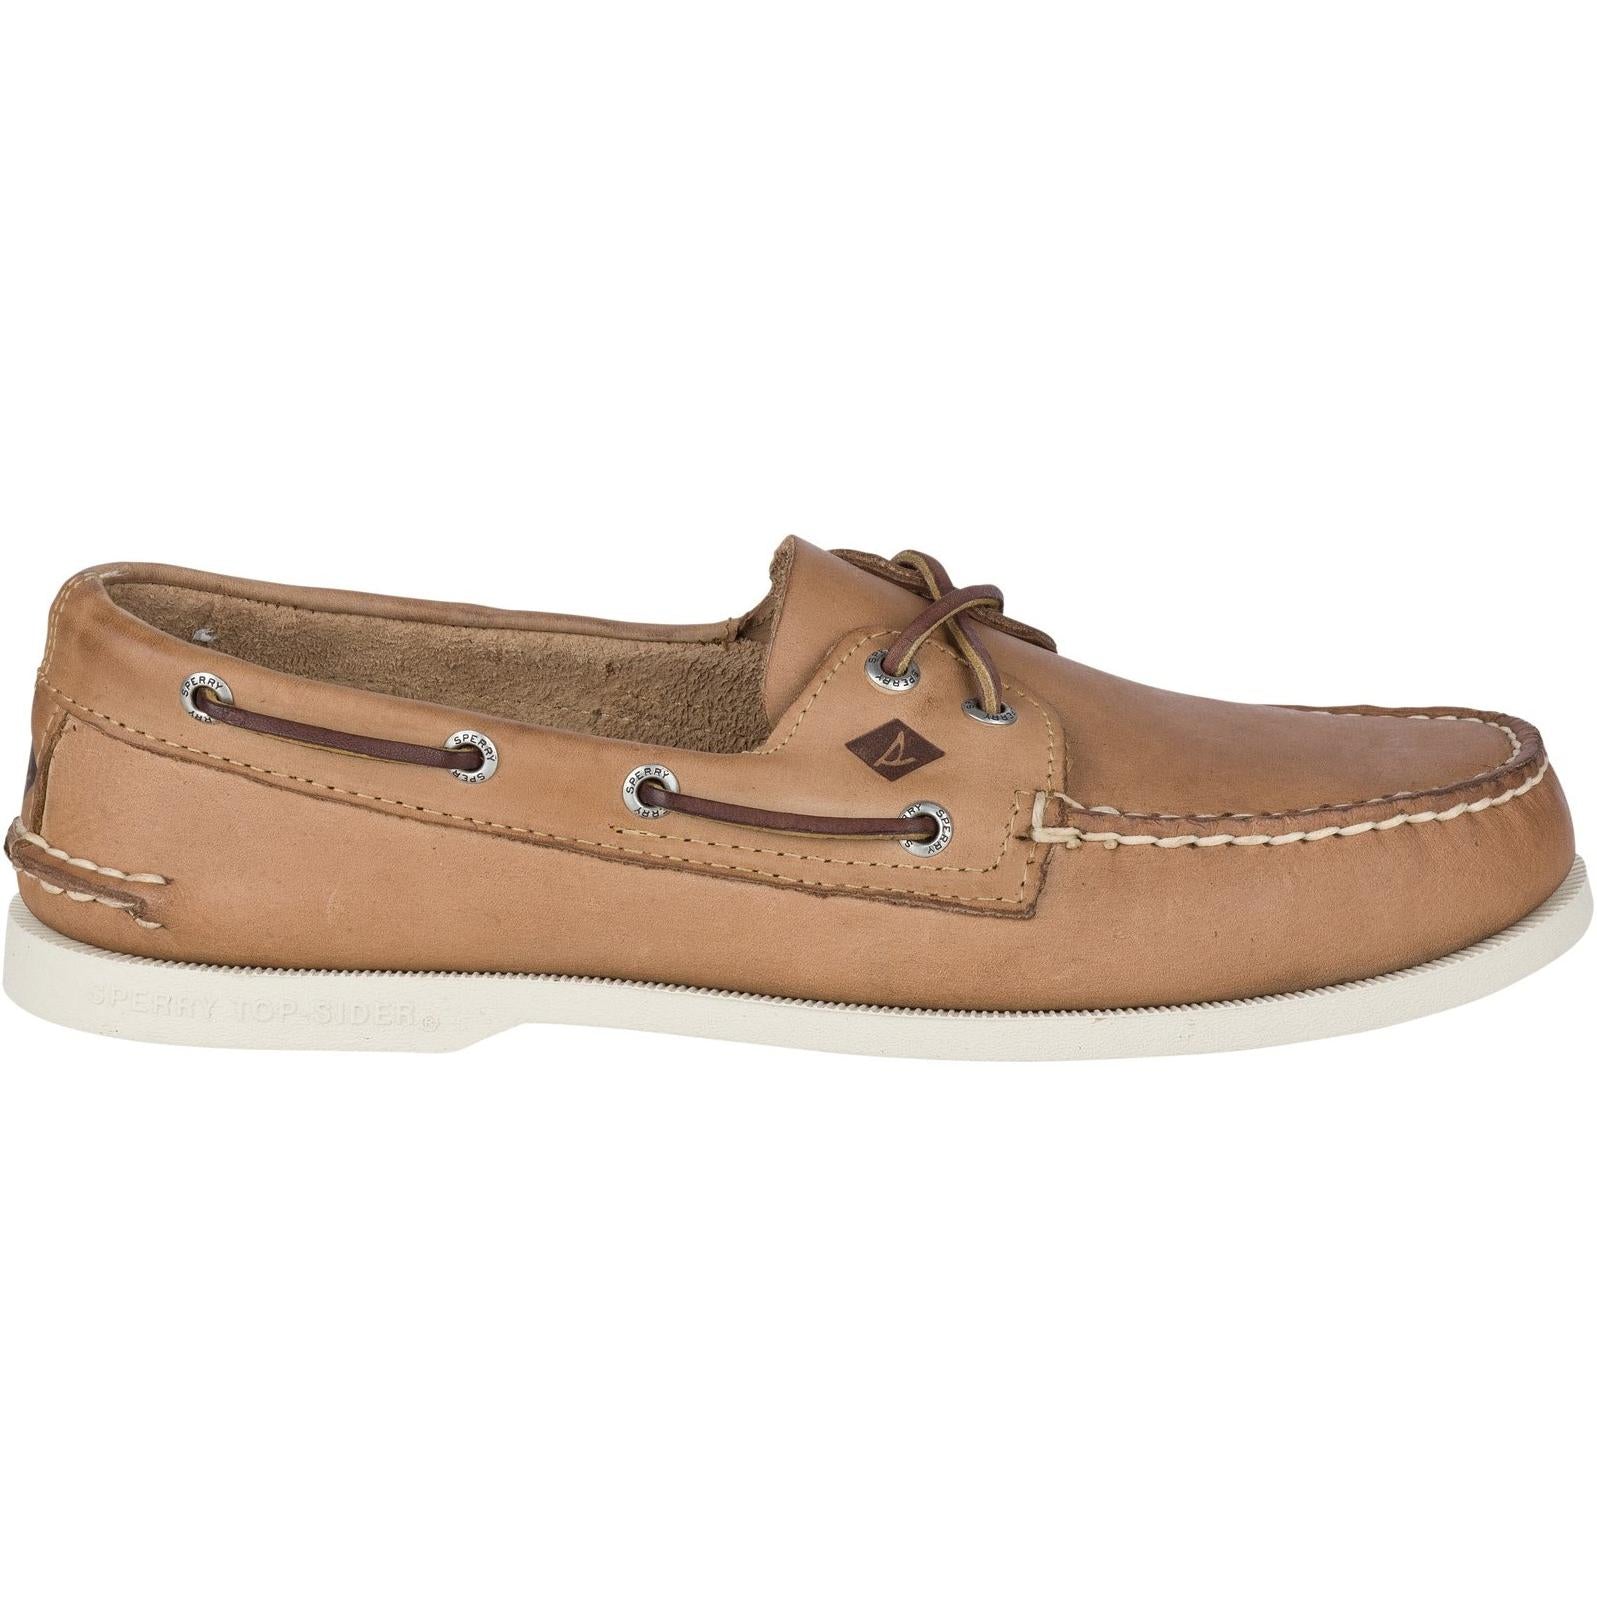 Sperry Top-sider Authentic Original Leather Boat Shoe